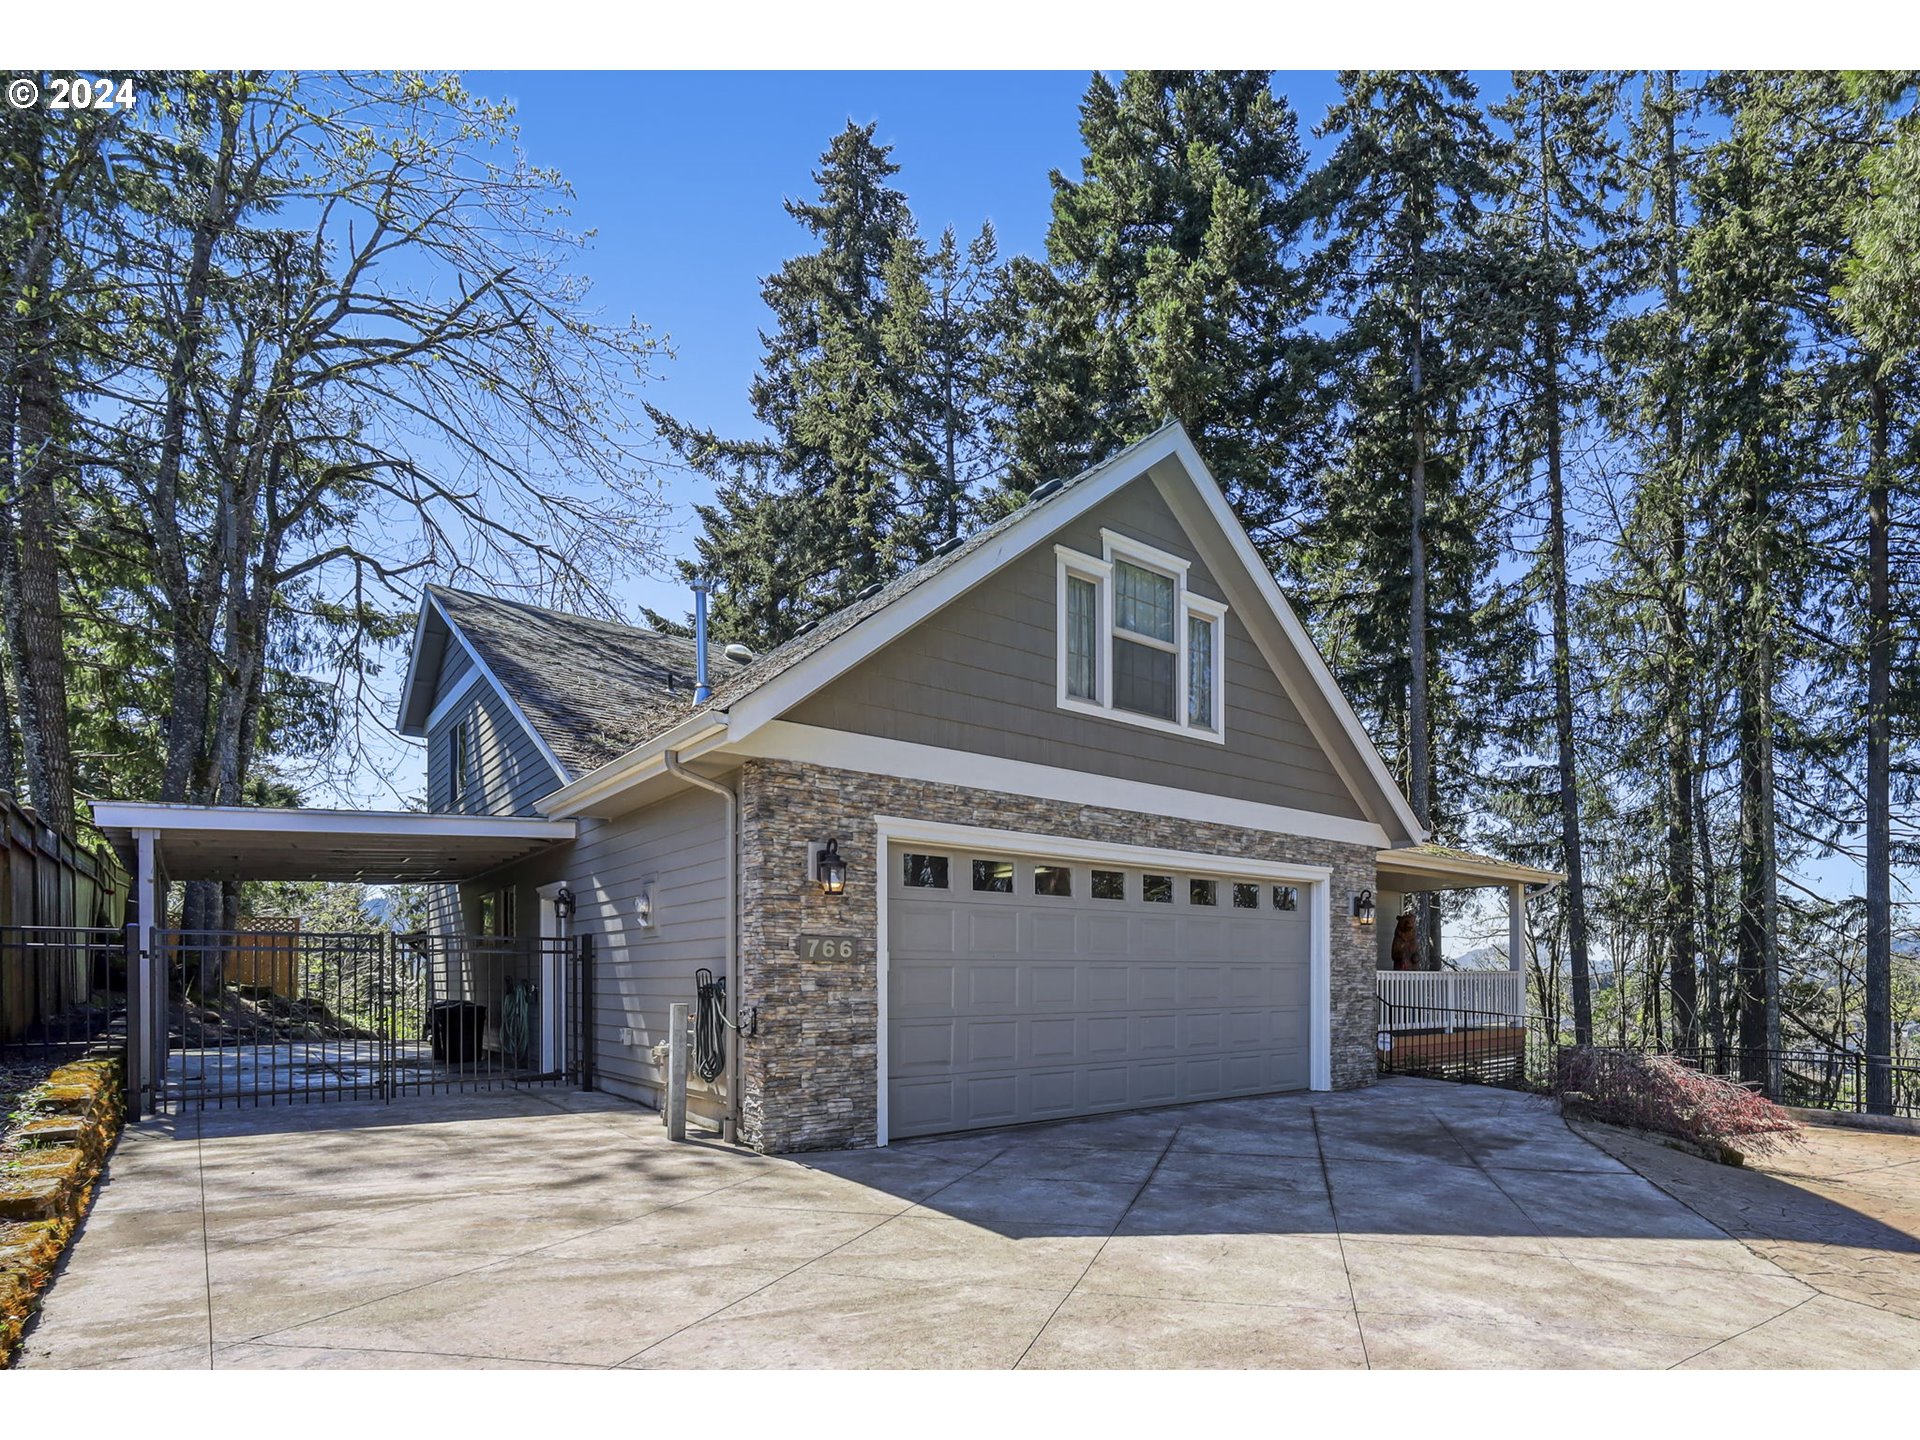 766 S 47th PL Eugene Home Listings - Galand Haas Real Estate